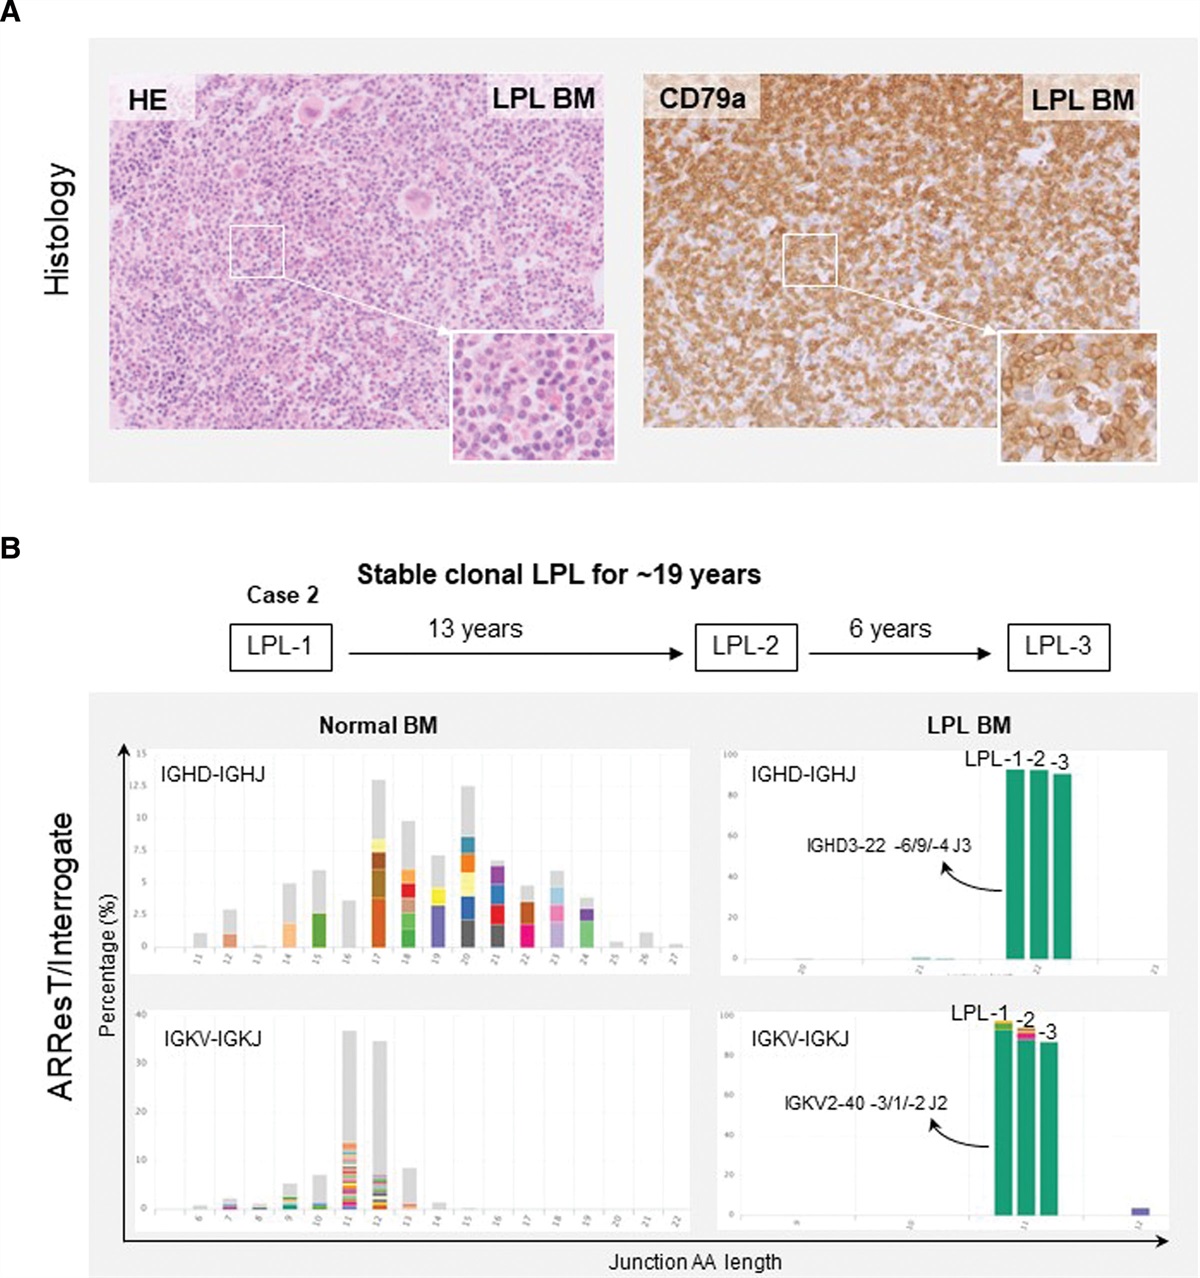 Clonal Relationship and Mutation Analysis in Lymphoplasmacytic Lymphoma/Waldenström Macroglobulinemia Associated With Diffuse Large B-cell Lymphoma